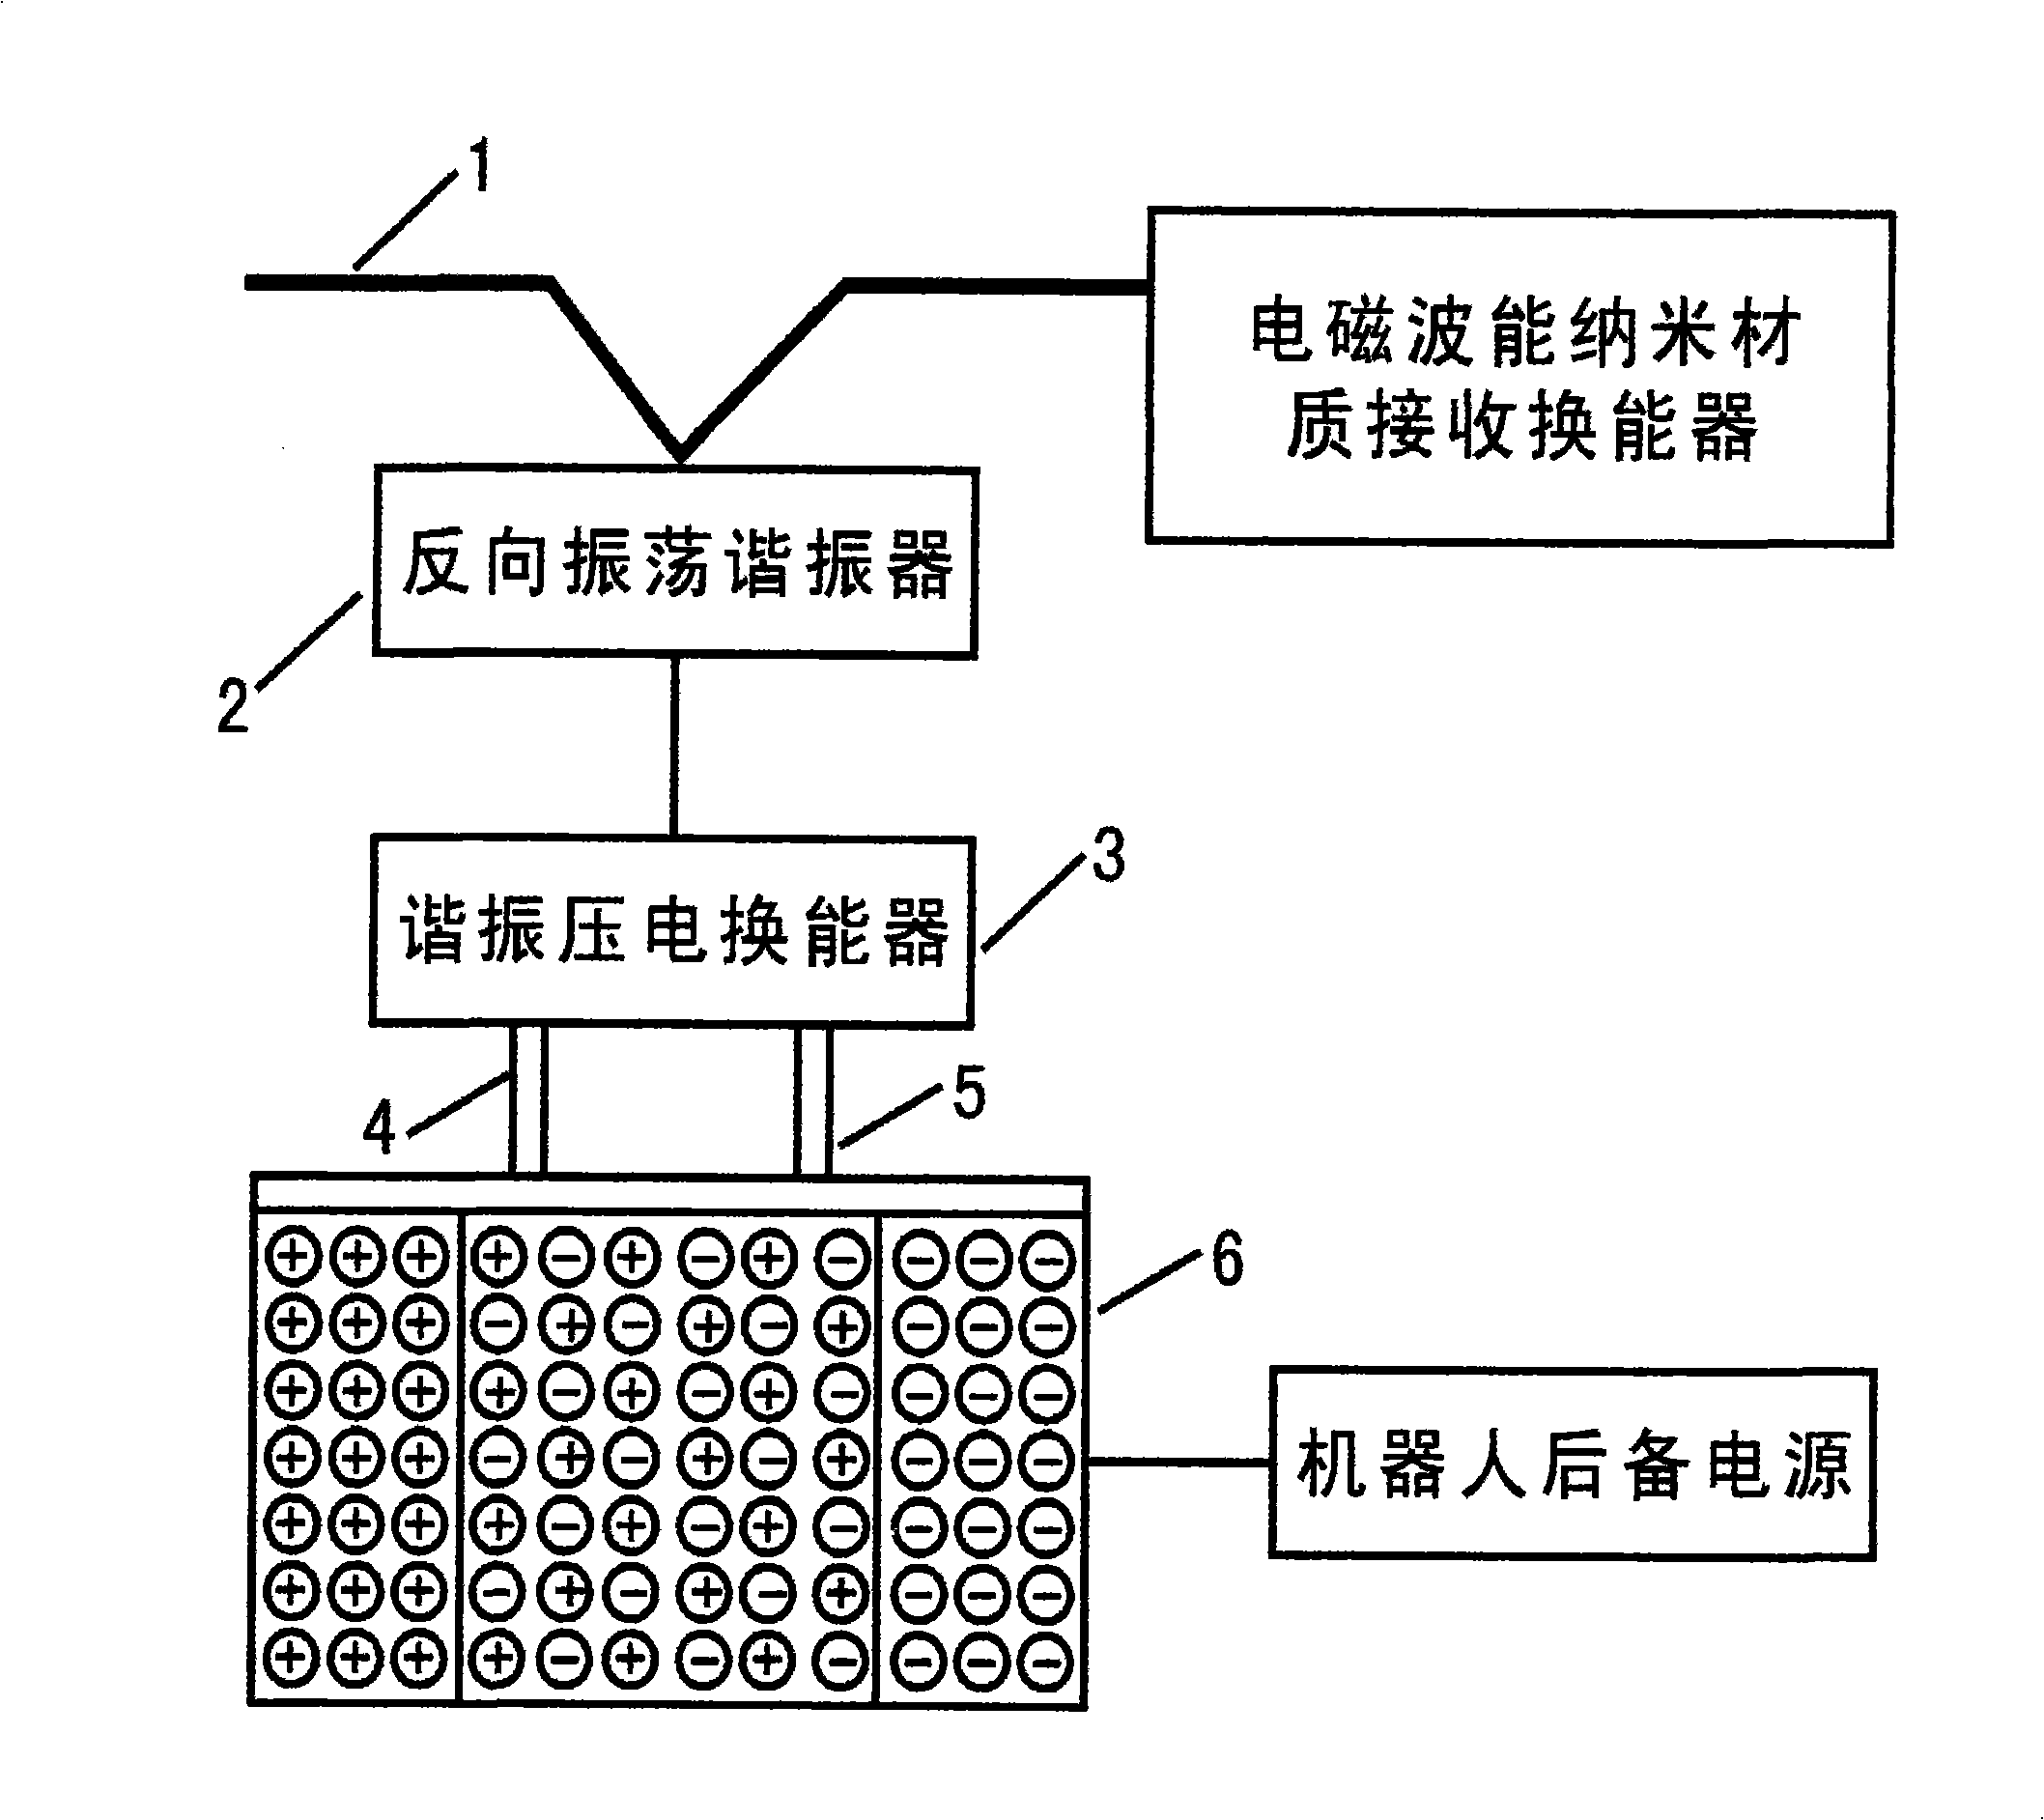 Auxiliary robot for wireless detecting and controlling assembly line product manufacture